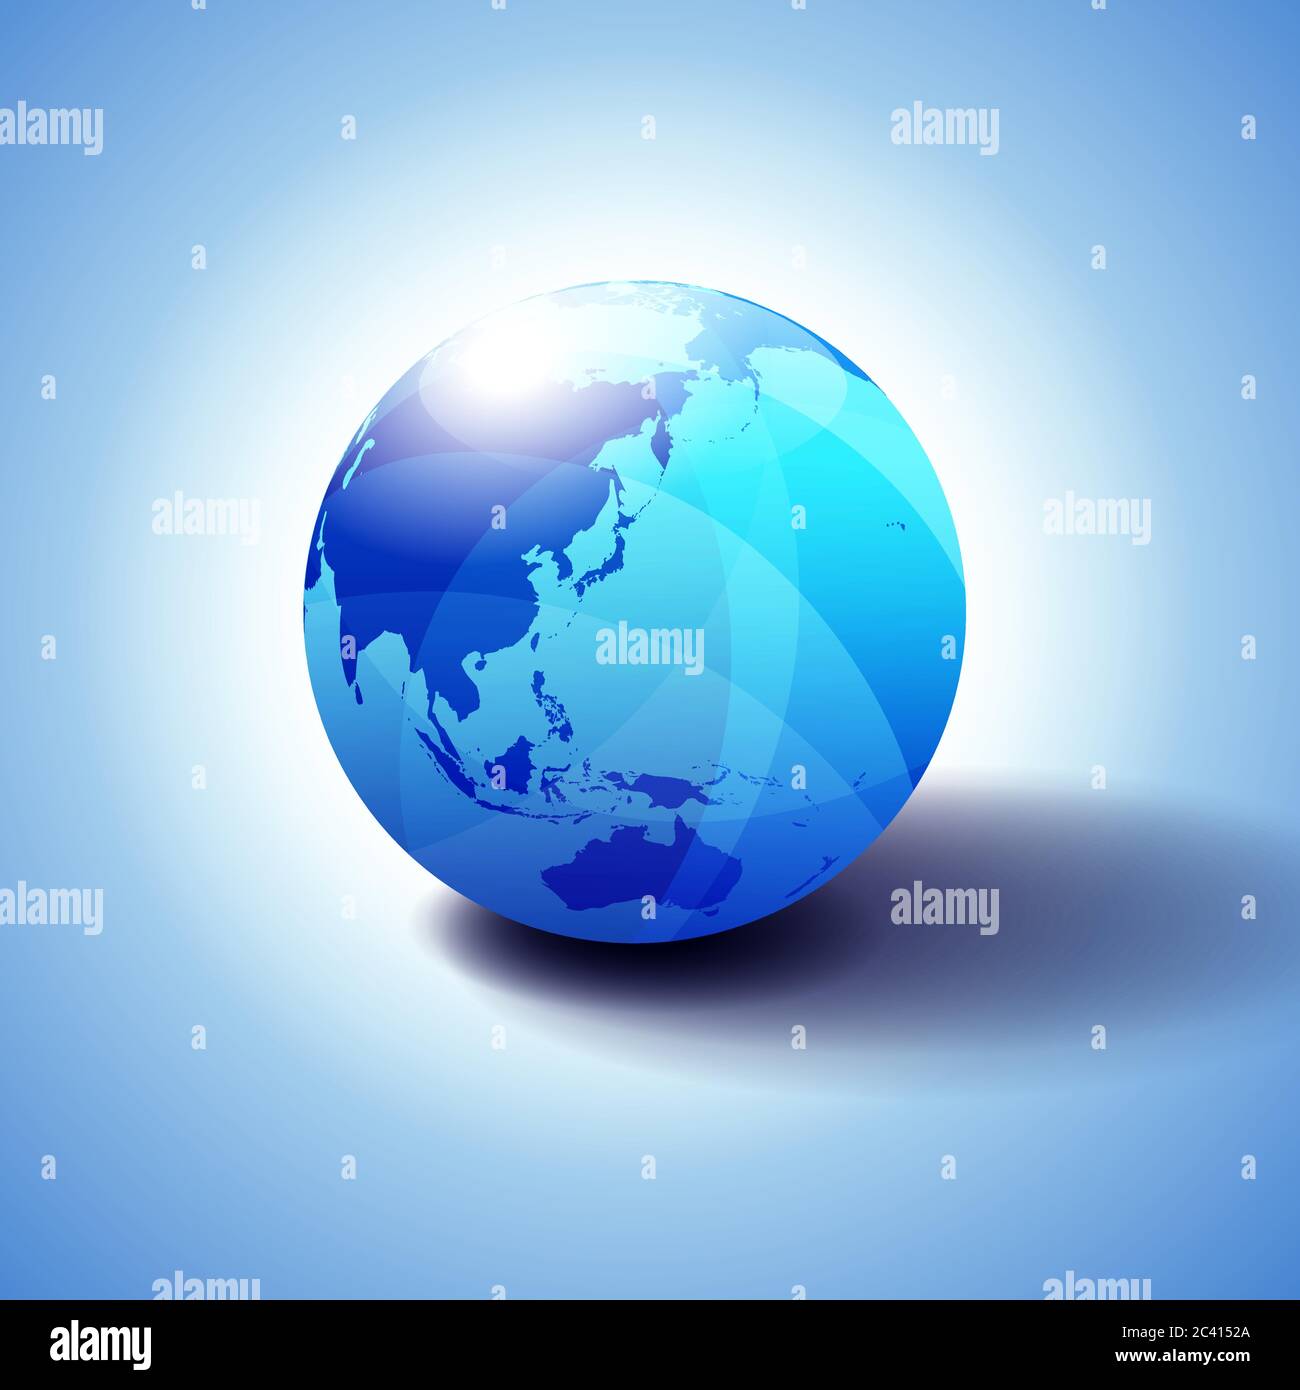 China, Japan, Malaysia, Thailand, Indonesia, Australia, Asia, Globe Icon 3D illustration, Glossy, Shiny Sphere with Global Map in Subtle Blues giving Stock Vector